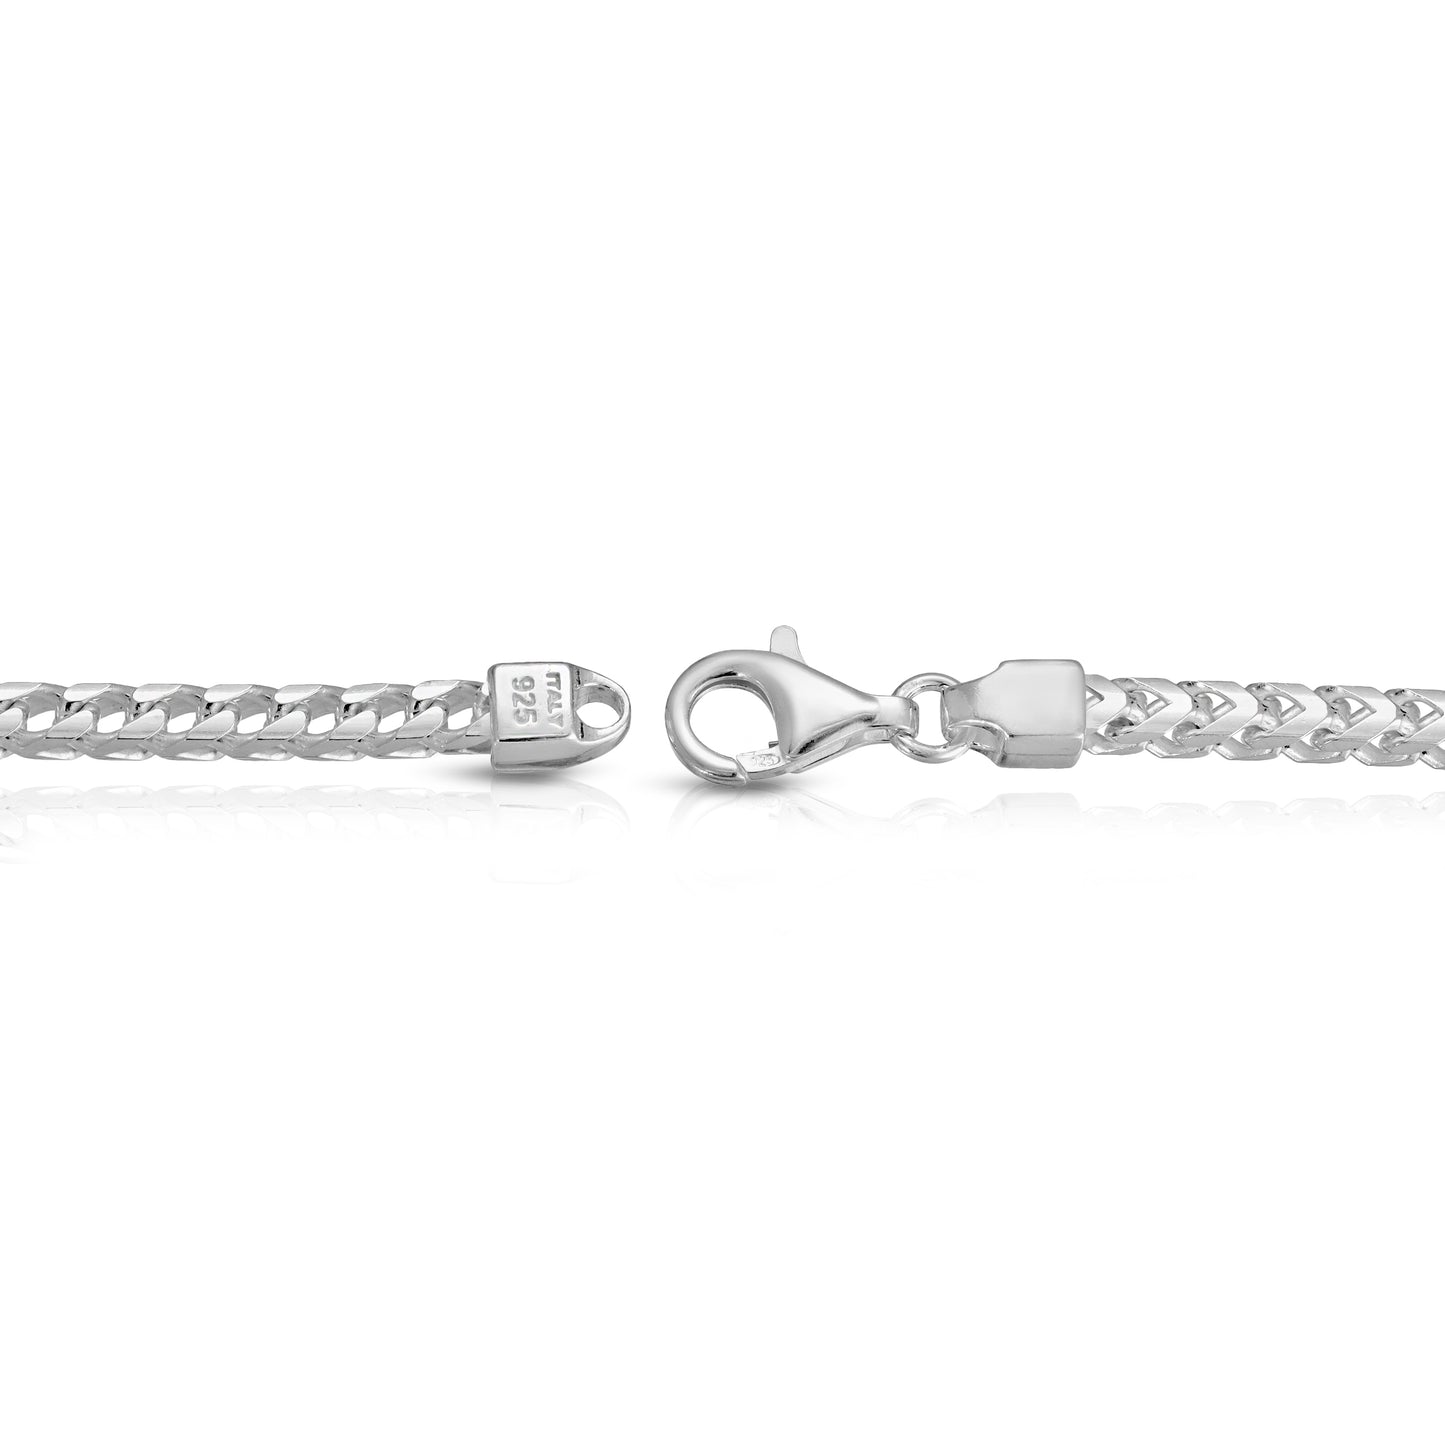 5mm Silver Franco Chain, Silver Chain for Men, Proclamation Jewelry